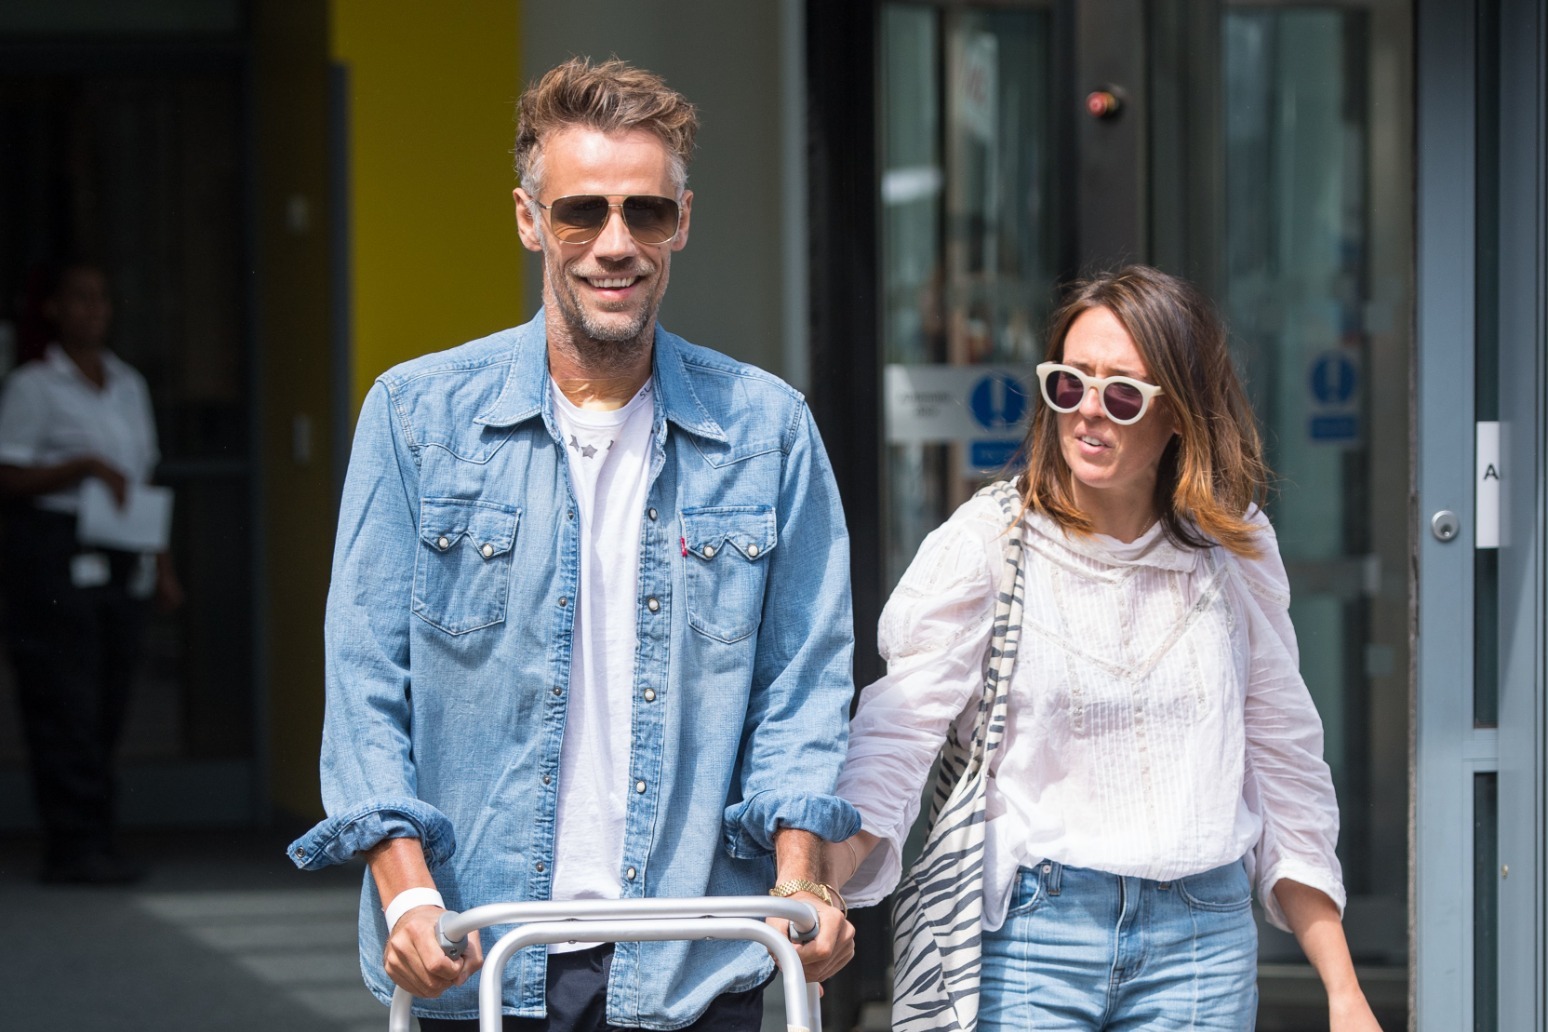 RICHARD BACON OPENS UP ABOUT ONGOING STRUGGLE WITH ALCOHOL 